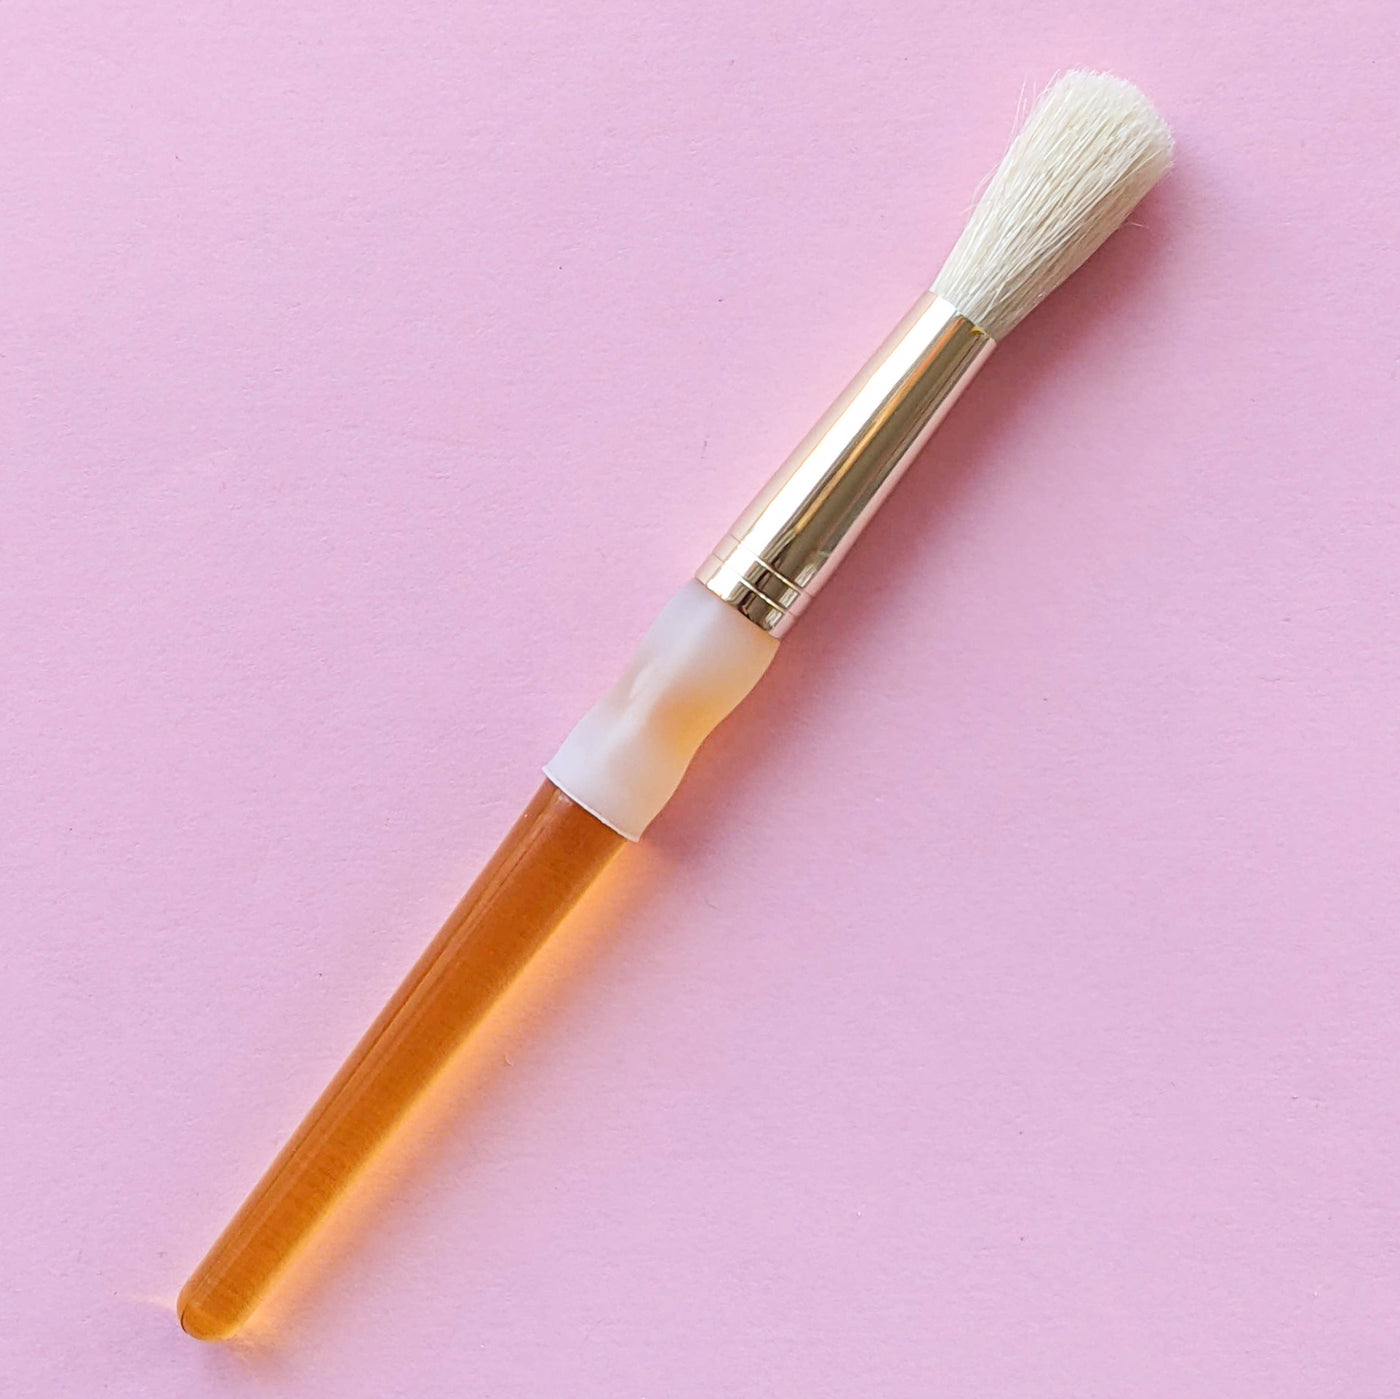 Chubby Round Paint Brush with a yellow handle